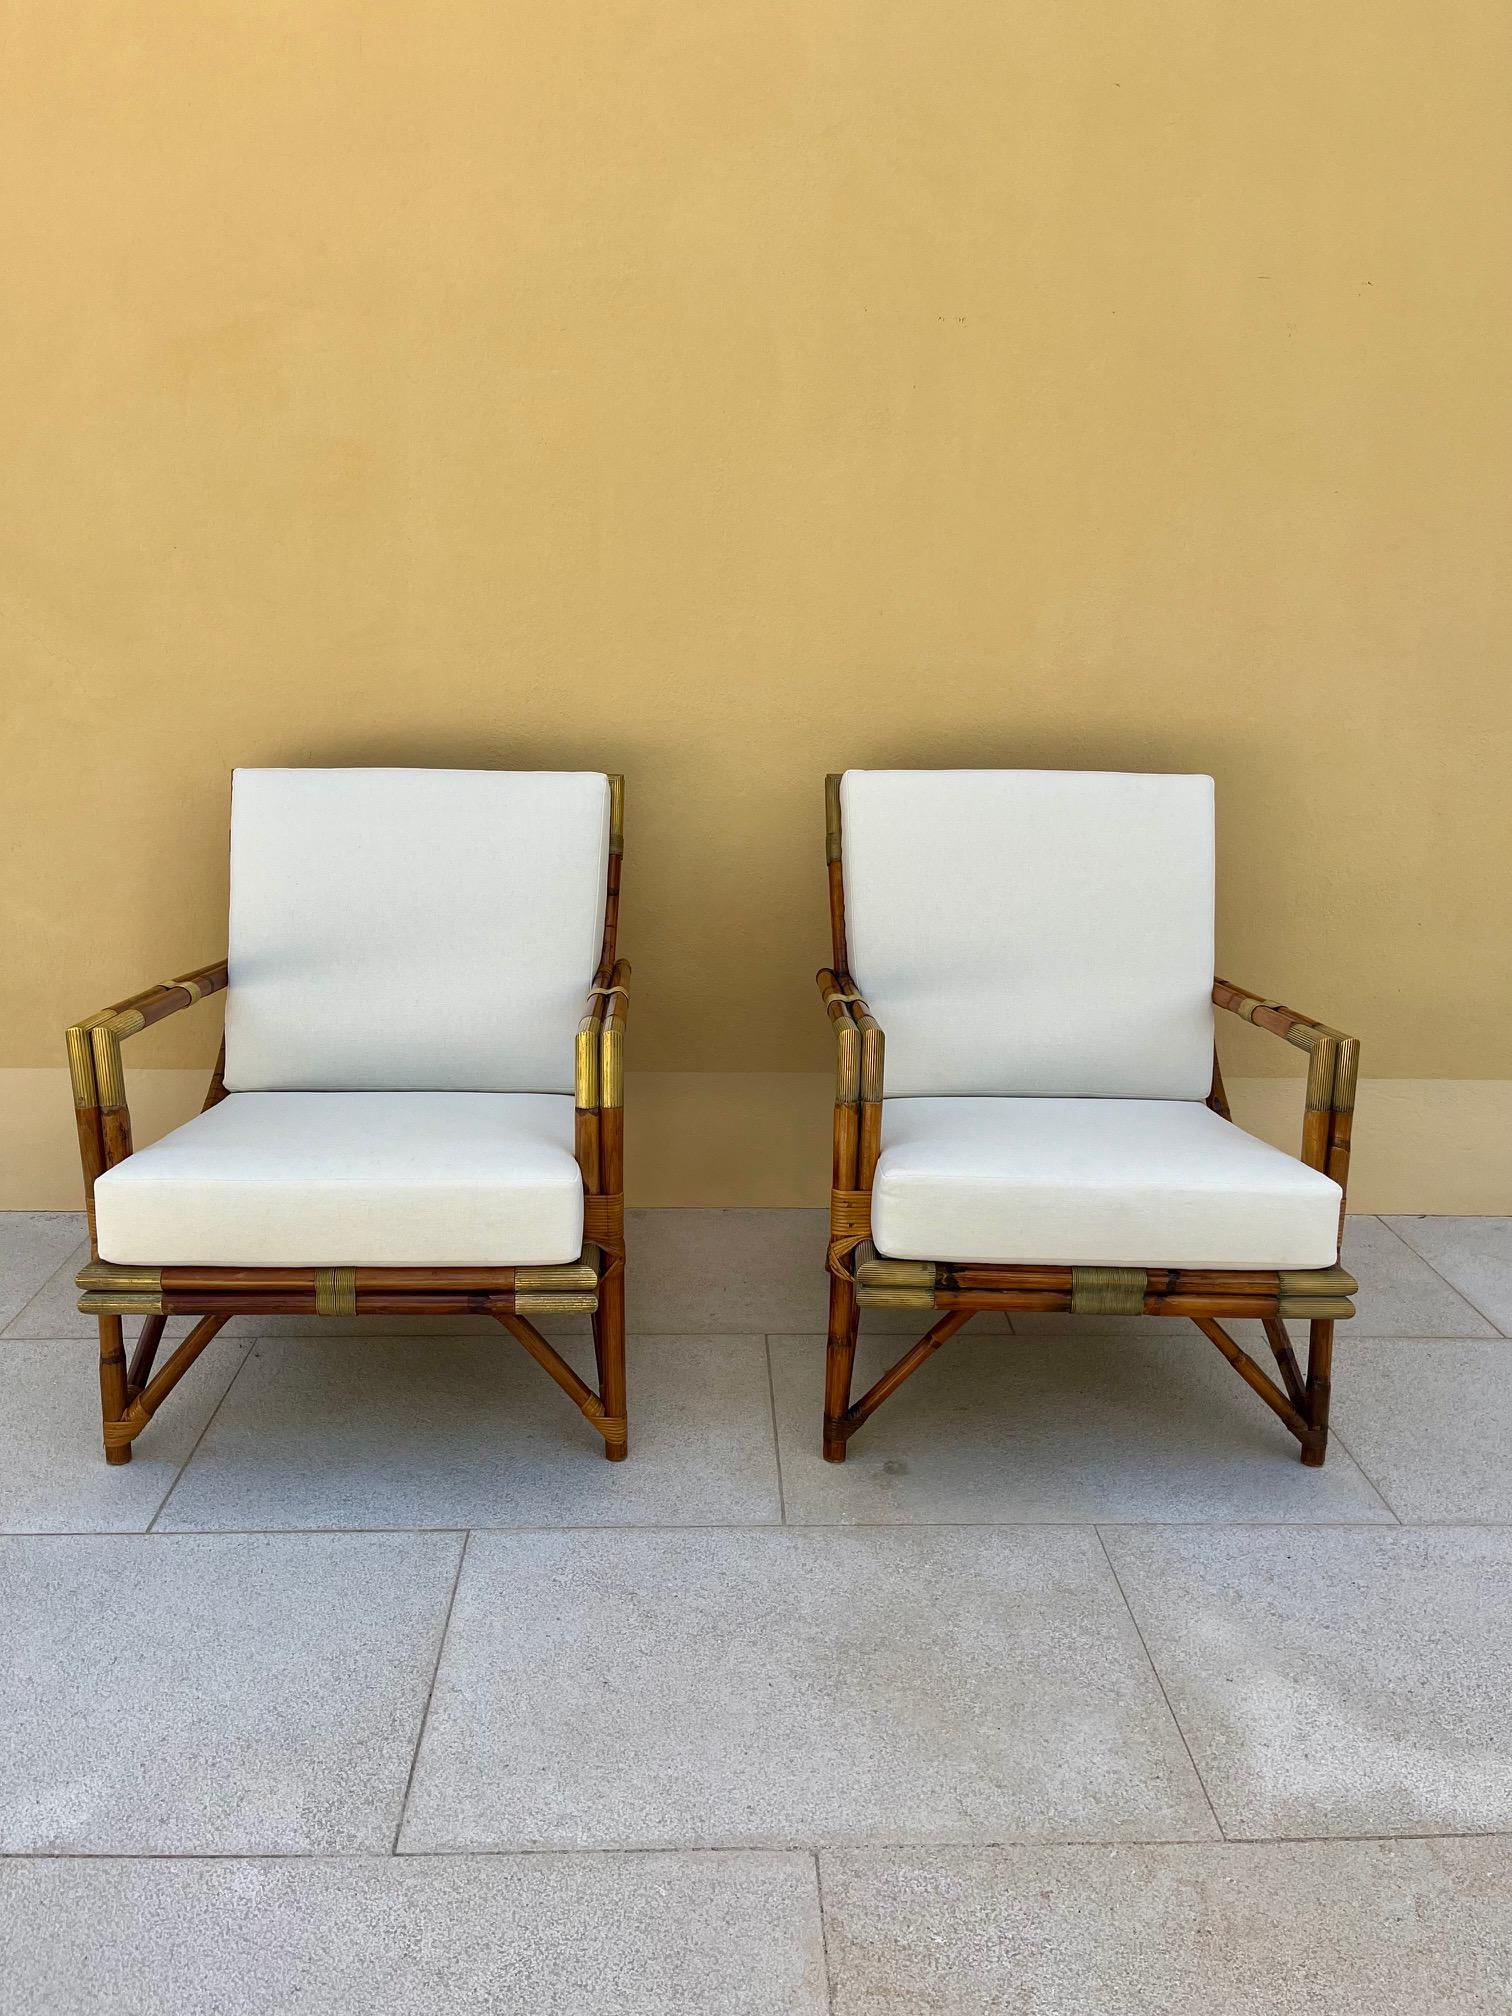 Mid-Century Modern Pair of  Lounge Chairs in Rattan and Brass, by Maison et Jardin, 1950's  For Sale